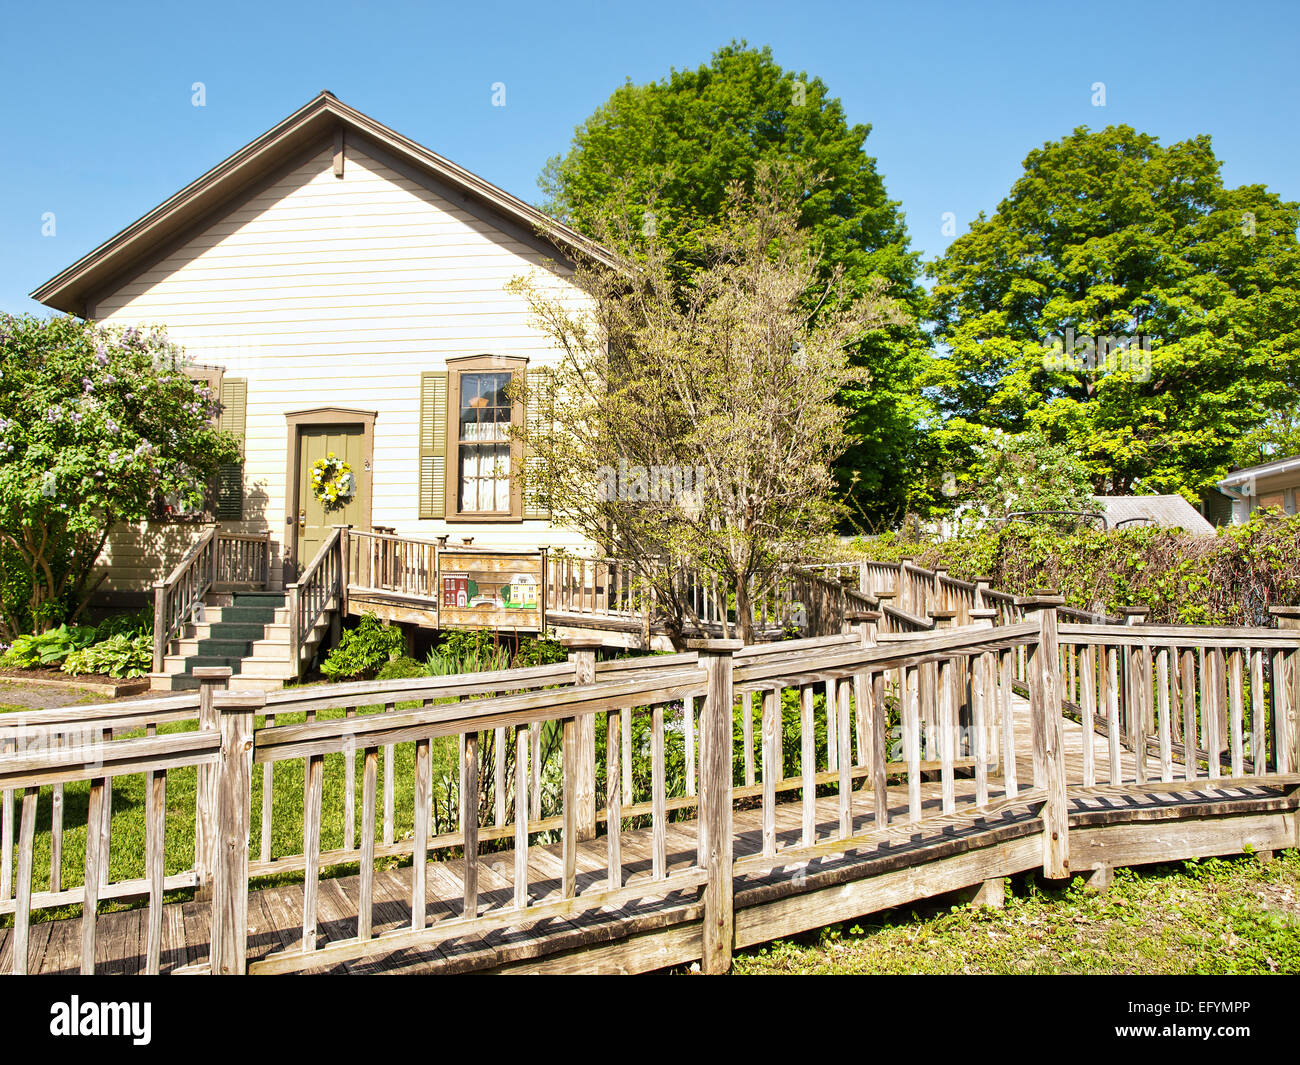 pretty home with wooden handicap ramp Stock Photo